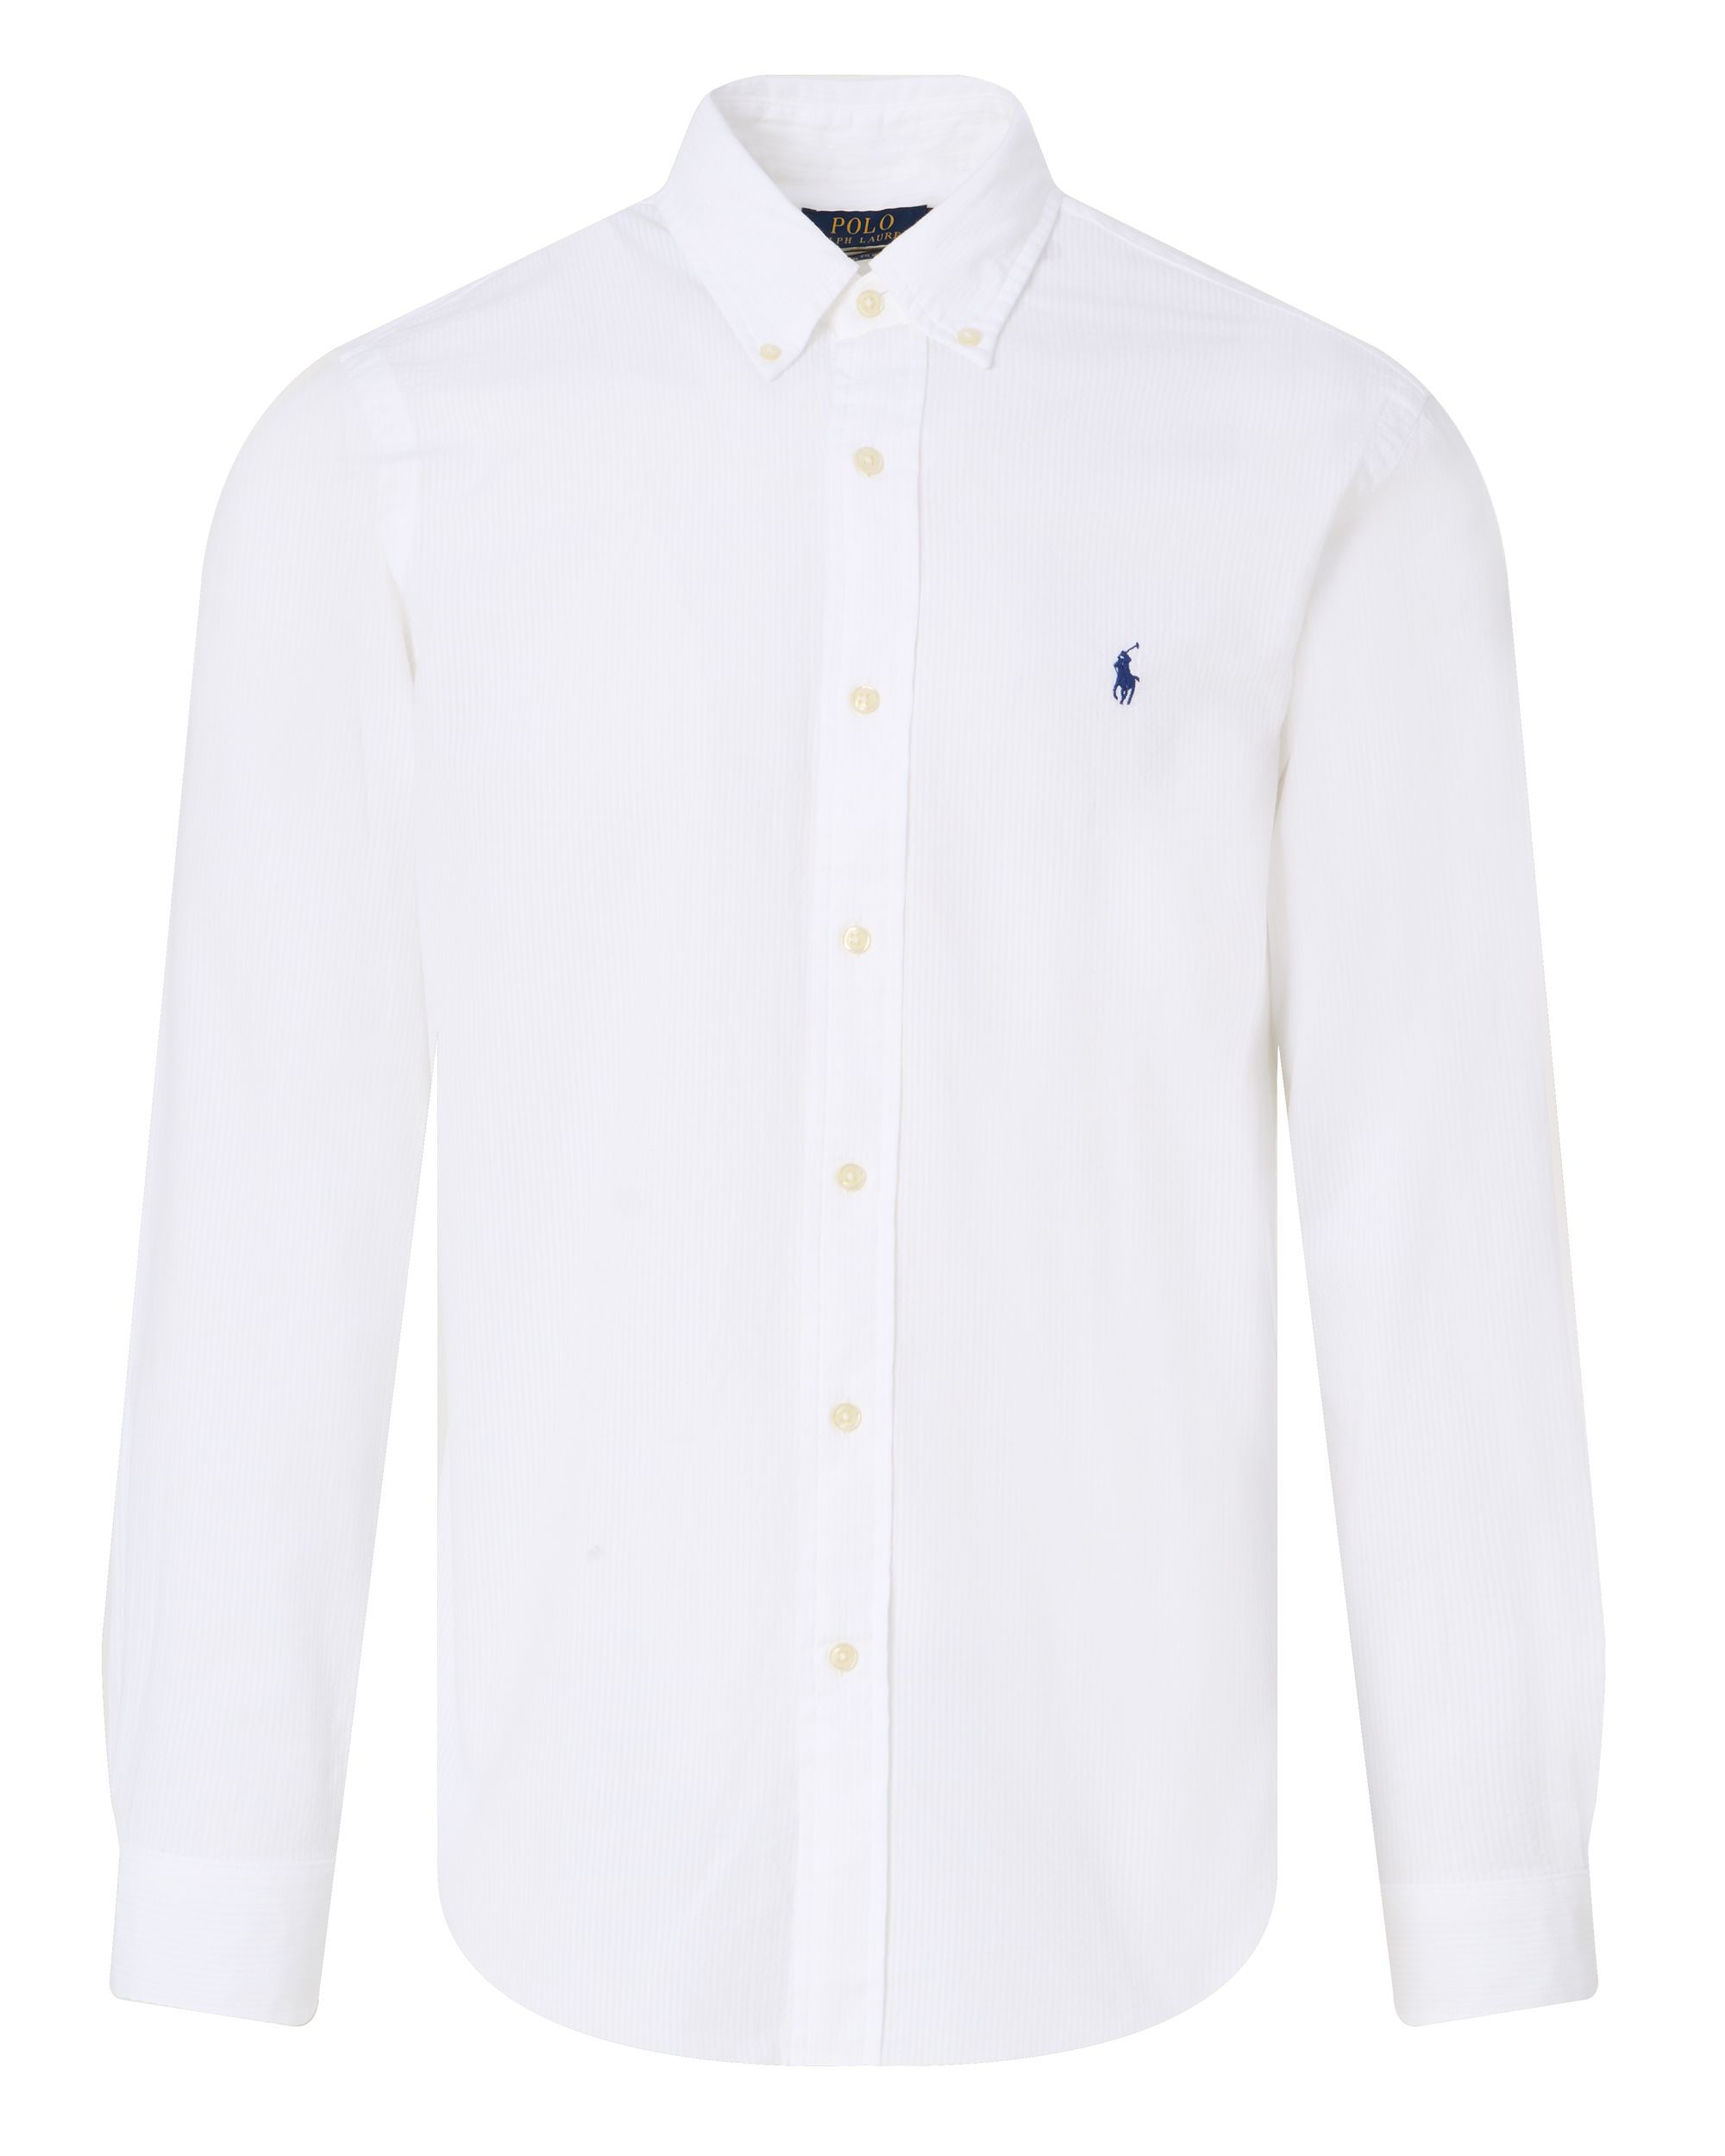 Polo Ralph Lauren Casual Overhemd LM Wit 095275-001-L